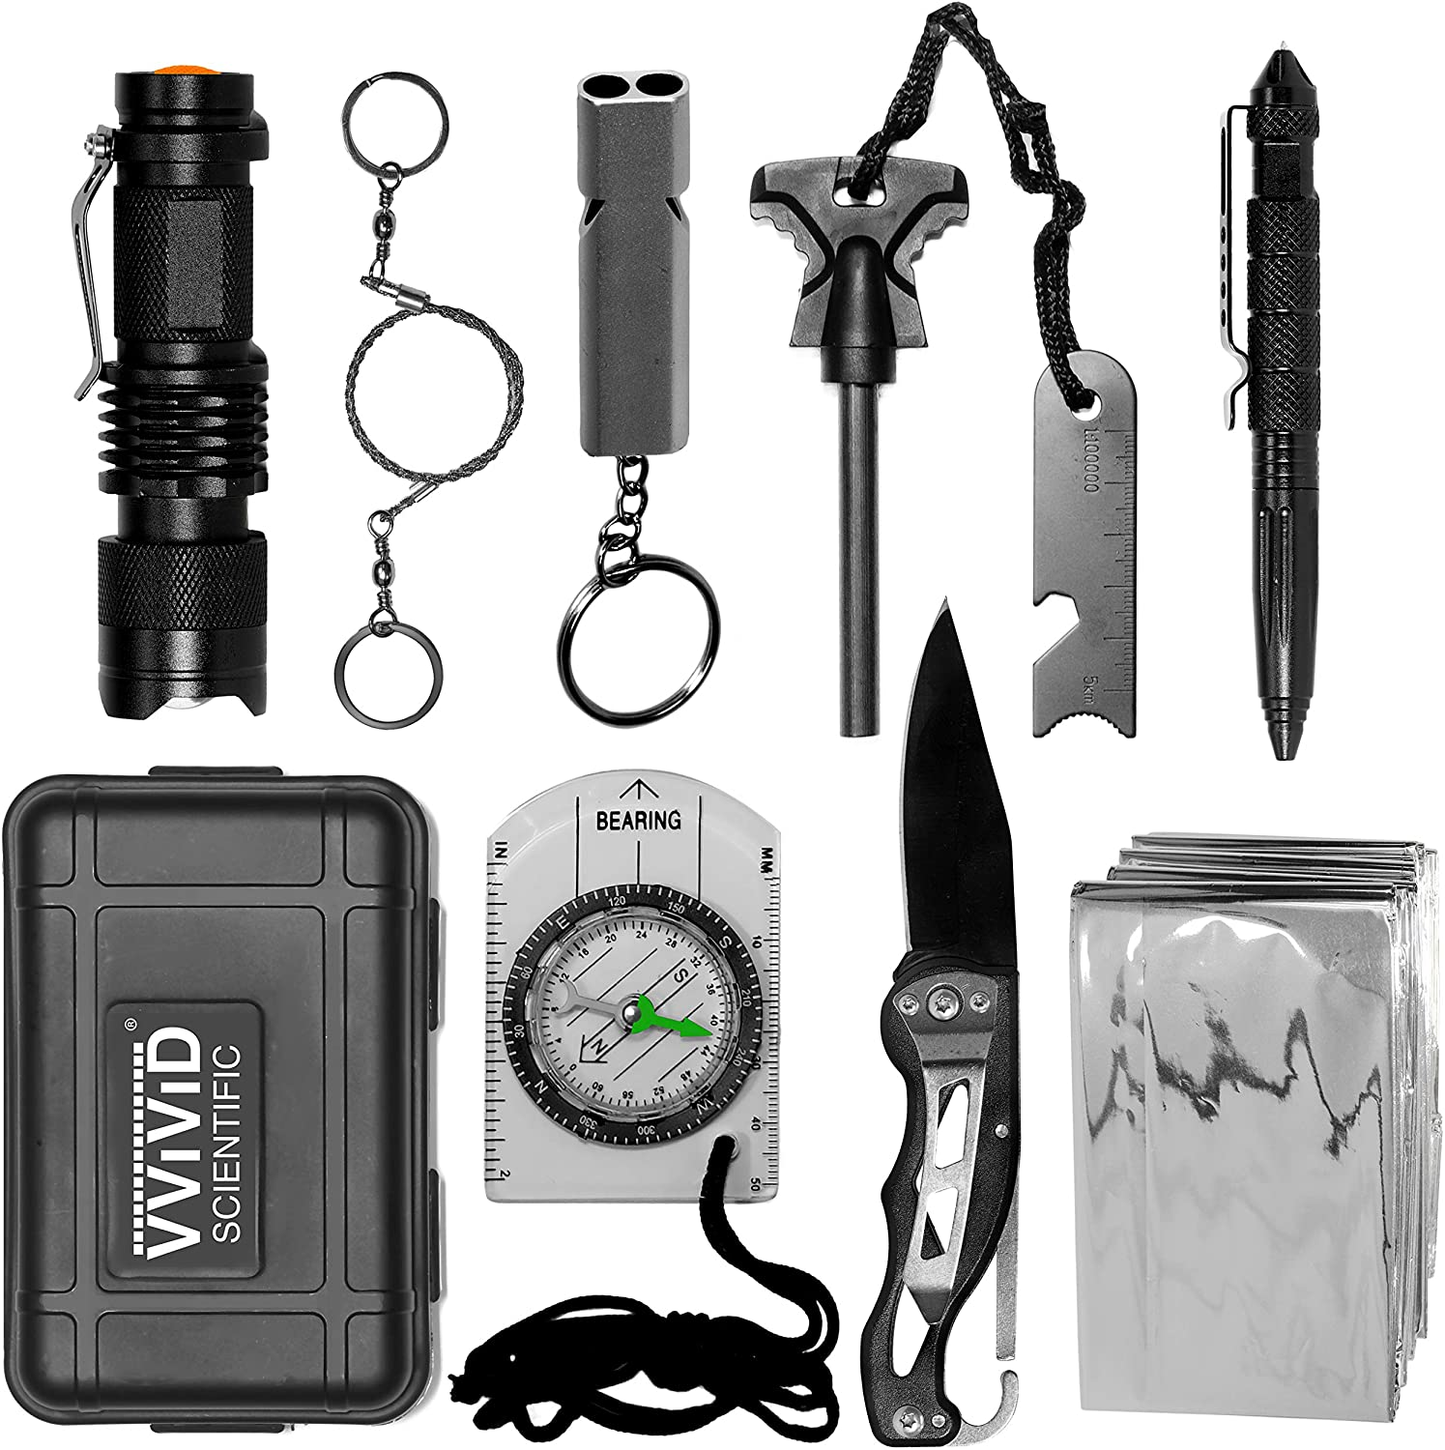 10 in 1 Emergency Tactical Gear Survival Kit Knife Blanket Compass Fire Starter Flashlight Saw Outdoor Camping Hiking Hunting Adventure Sport Supplies